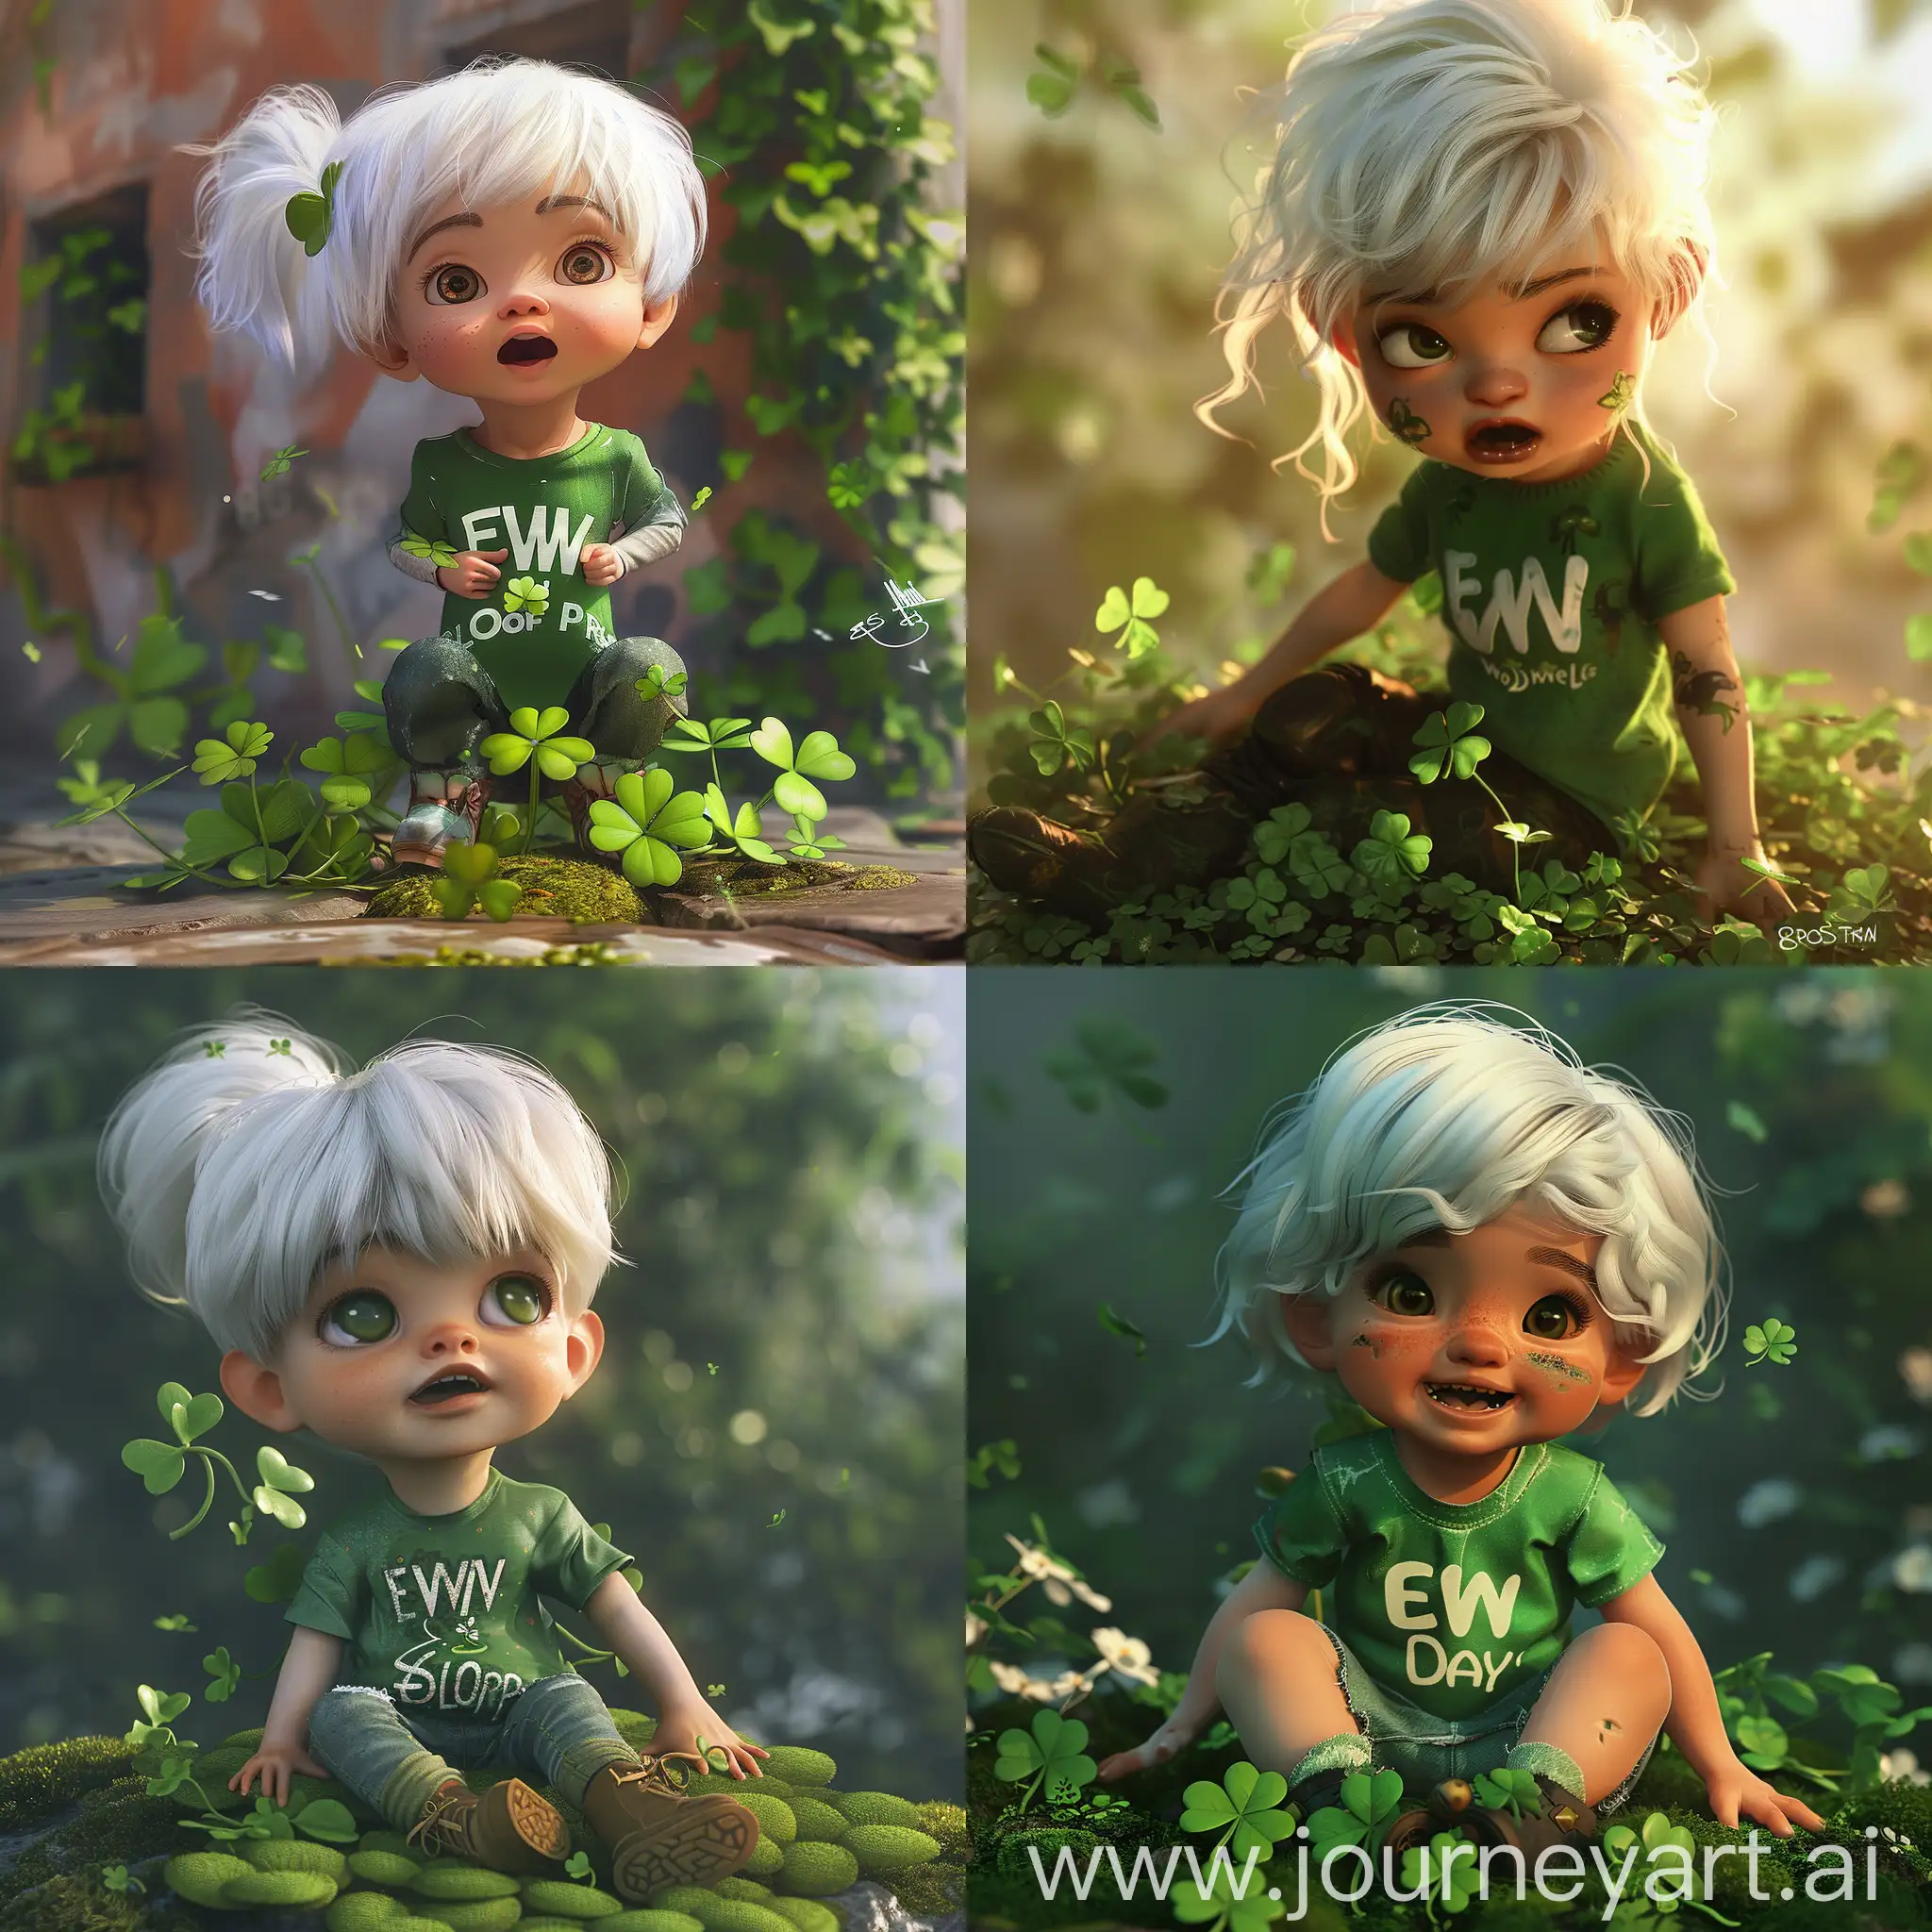 Cute-Little-Girl-Celebrating-St-Patricks-Day-on-a-Clover-with-EWW-Shirt